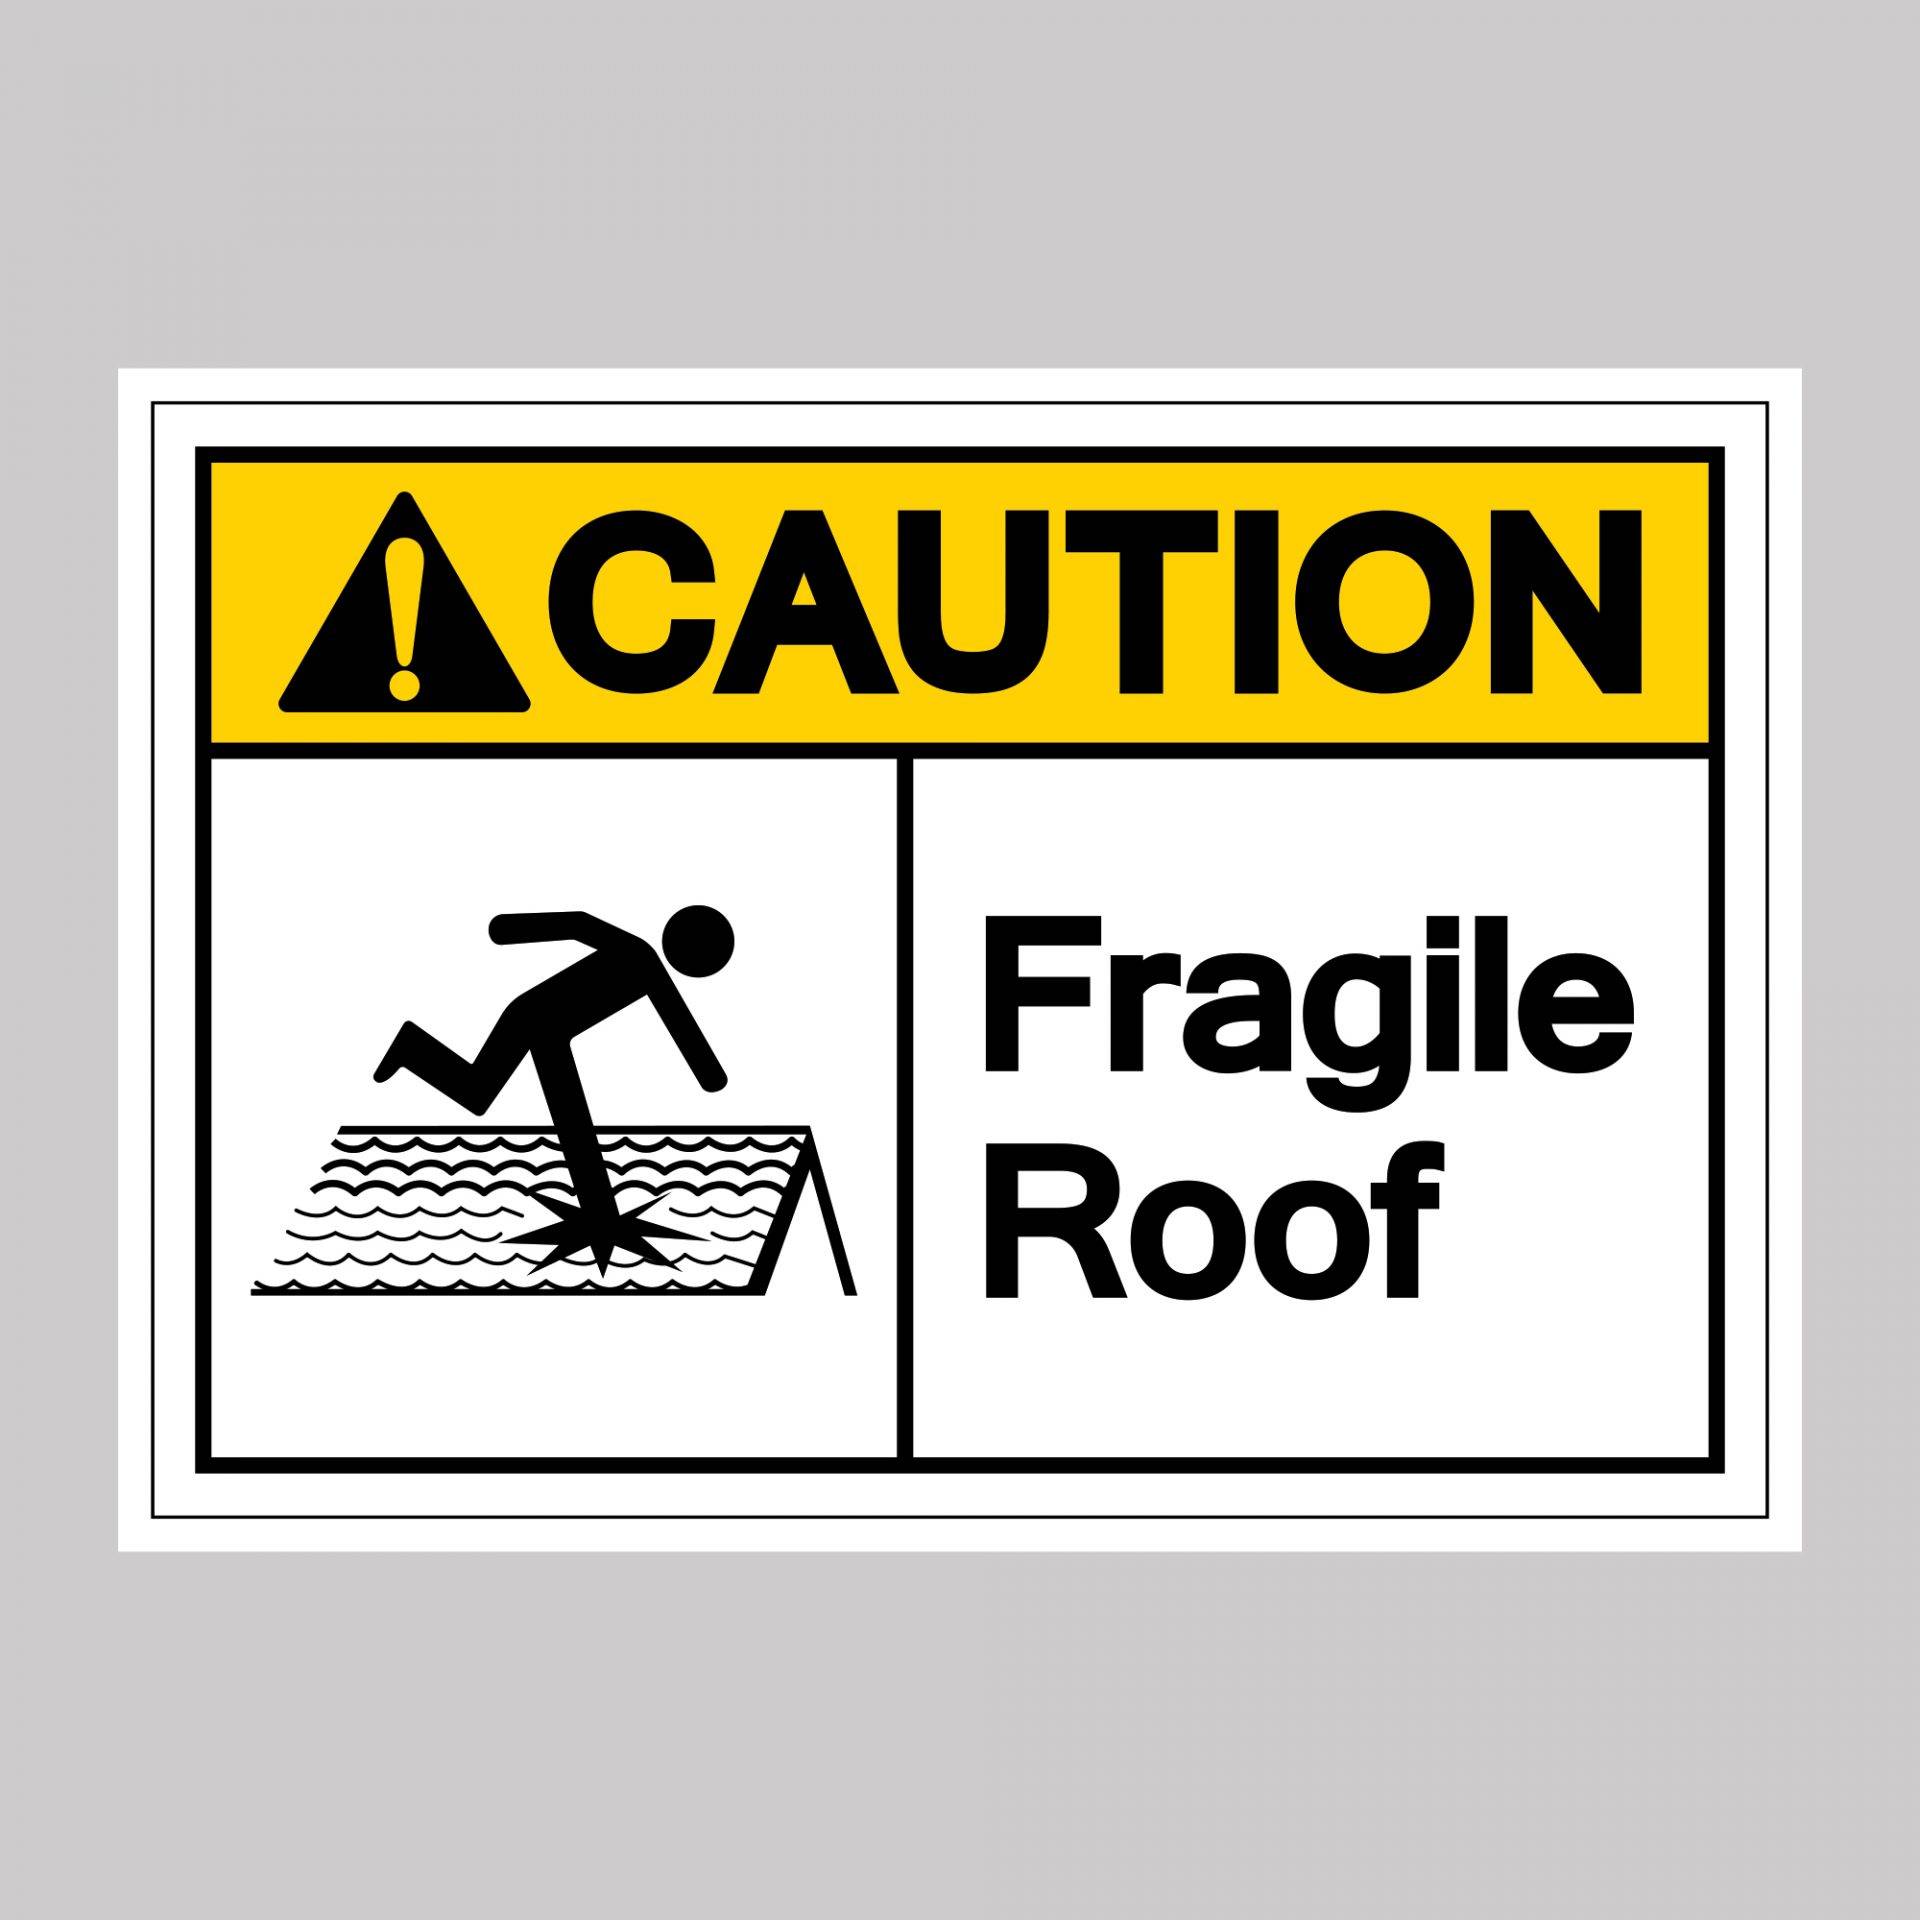 Caution Fragile Roof Safety Sign Board Vinyl Sticker Busines Indoor & Outdoor UK Product